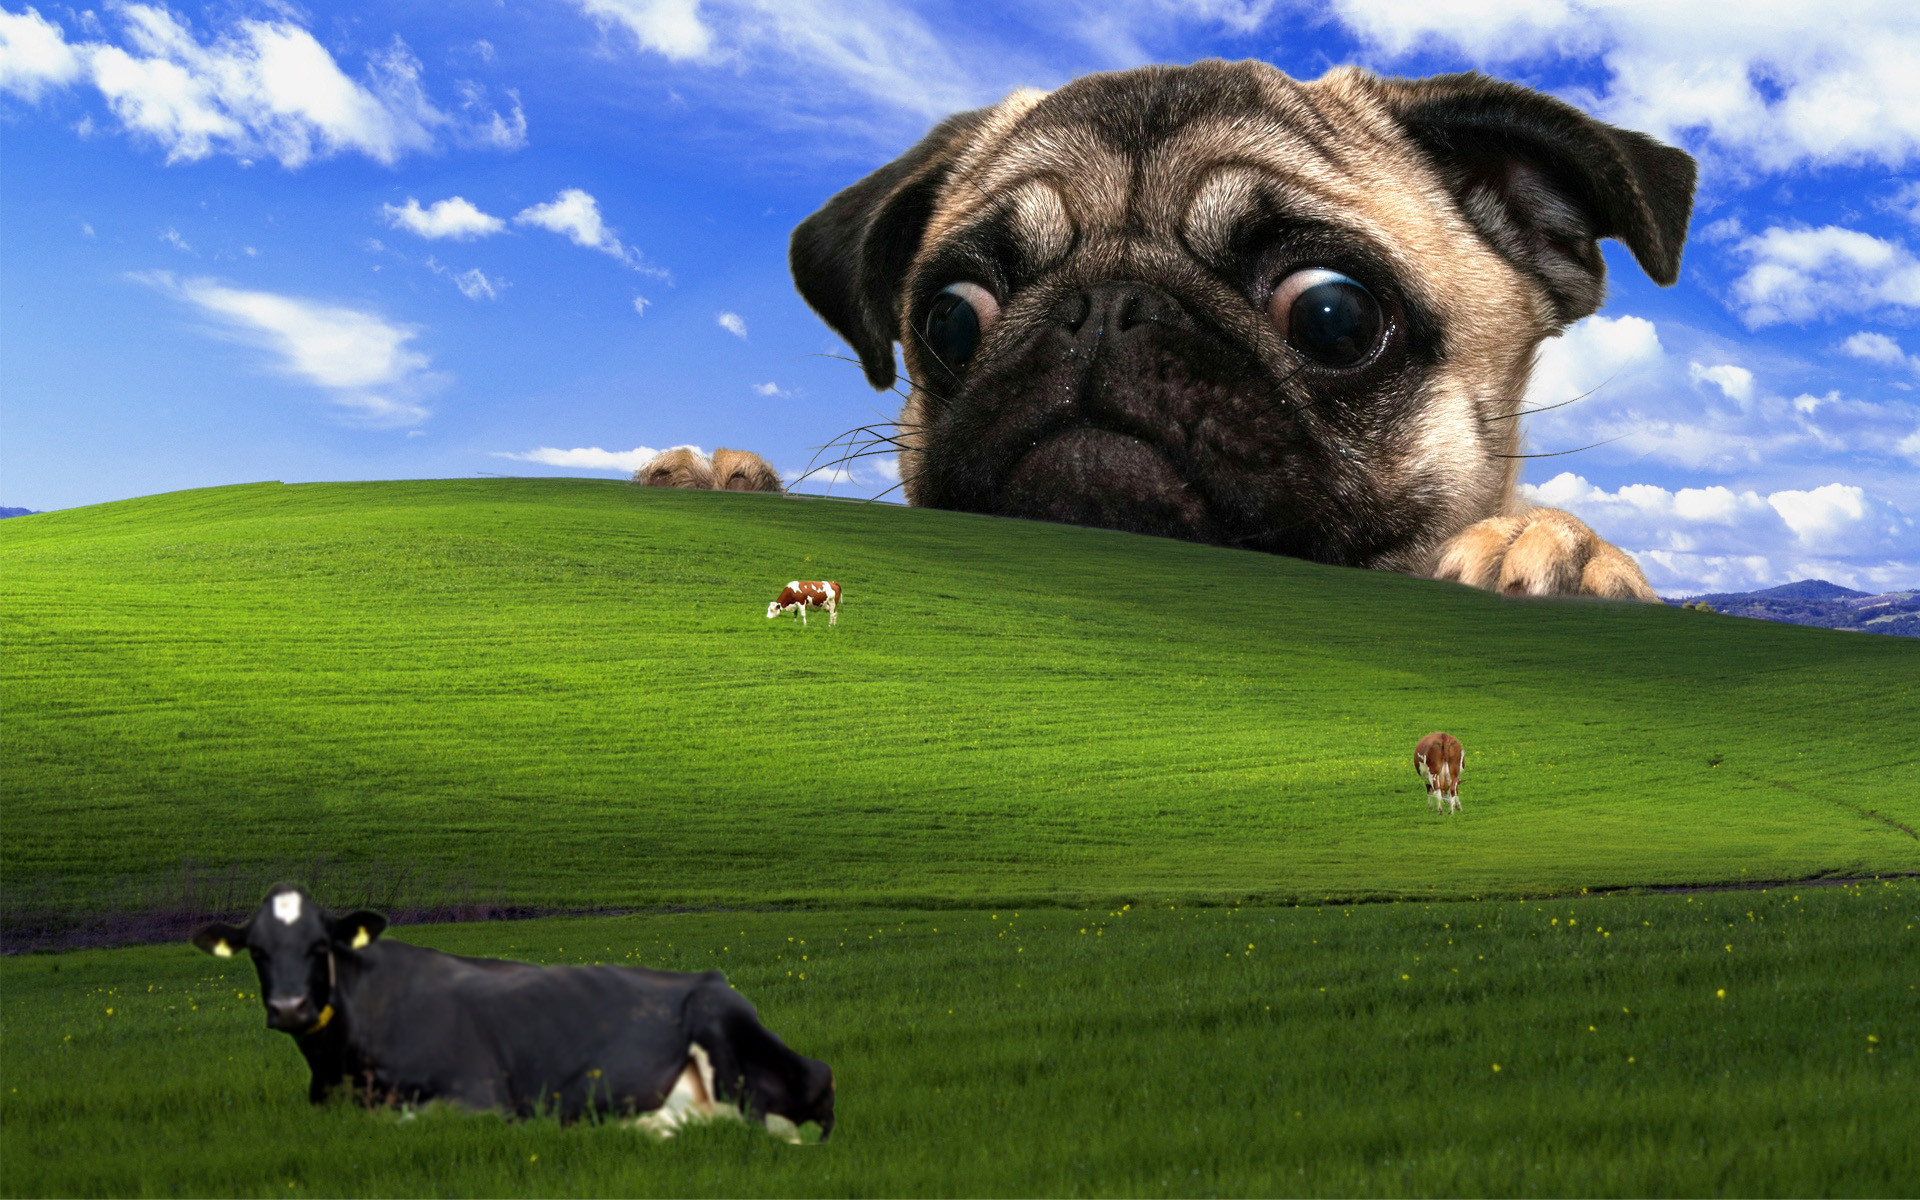 Funny Pug Pictures Wallpaper (75+ images)